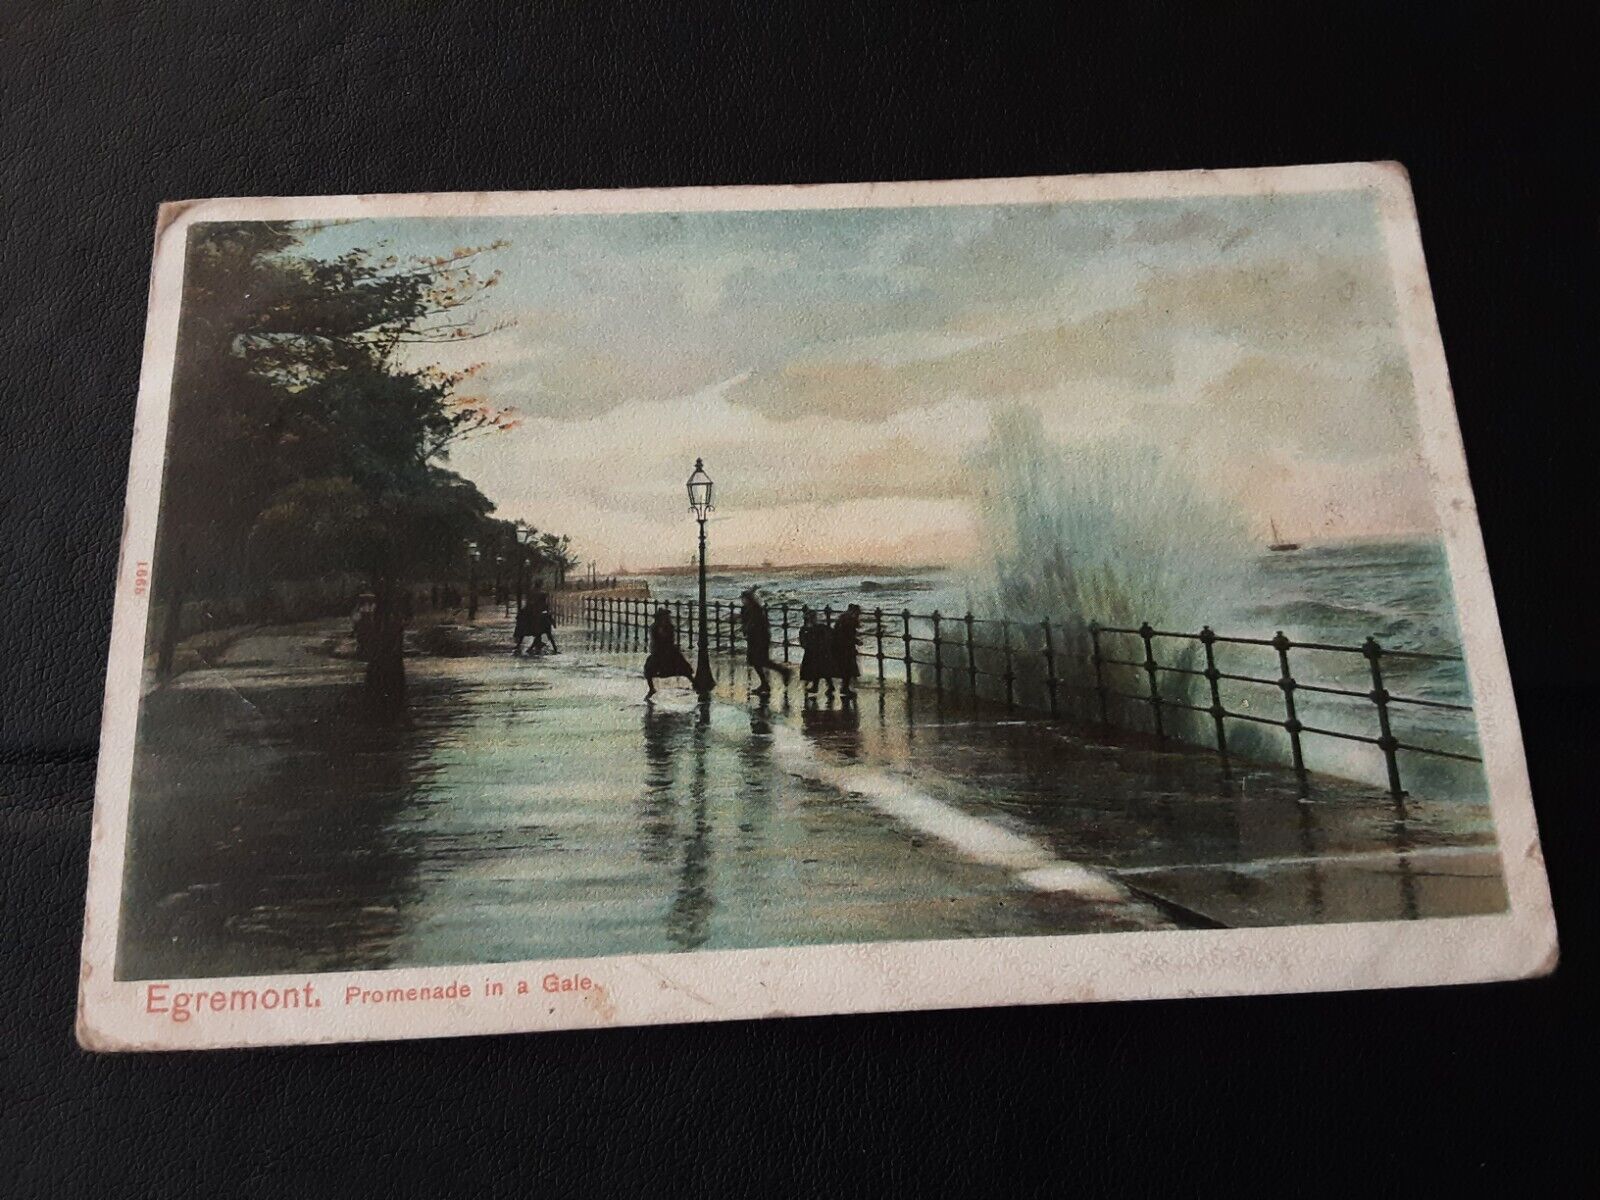 House Clearance - Old Peacock service of Egremont Promenade in a Gale, Cumbria posted 1908